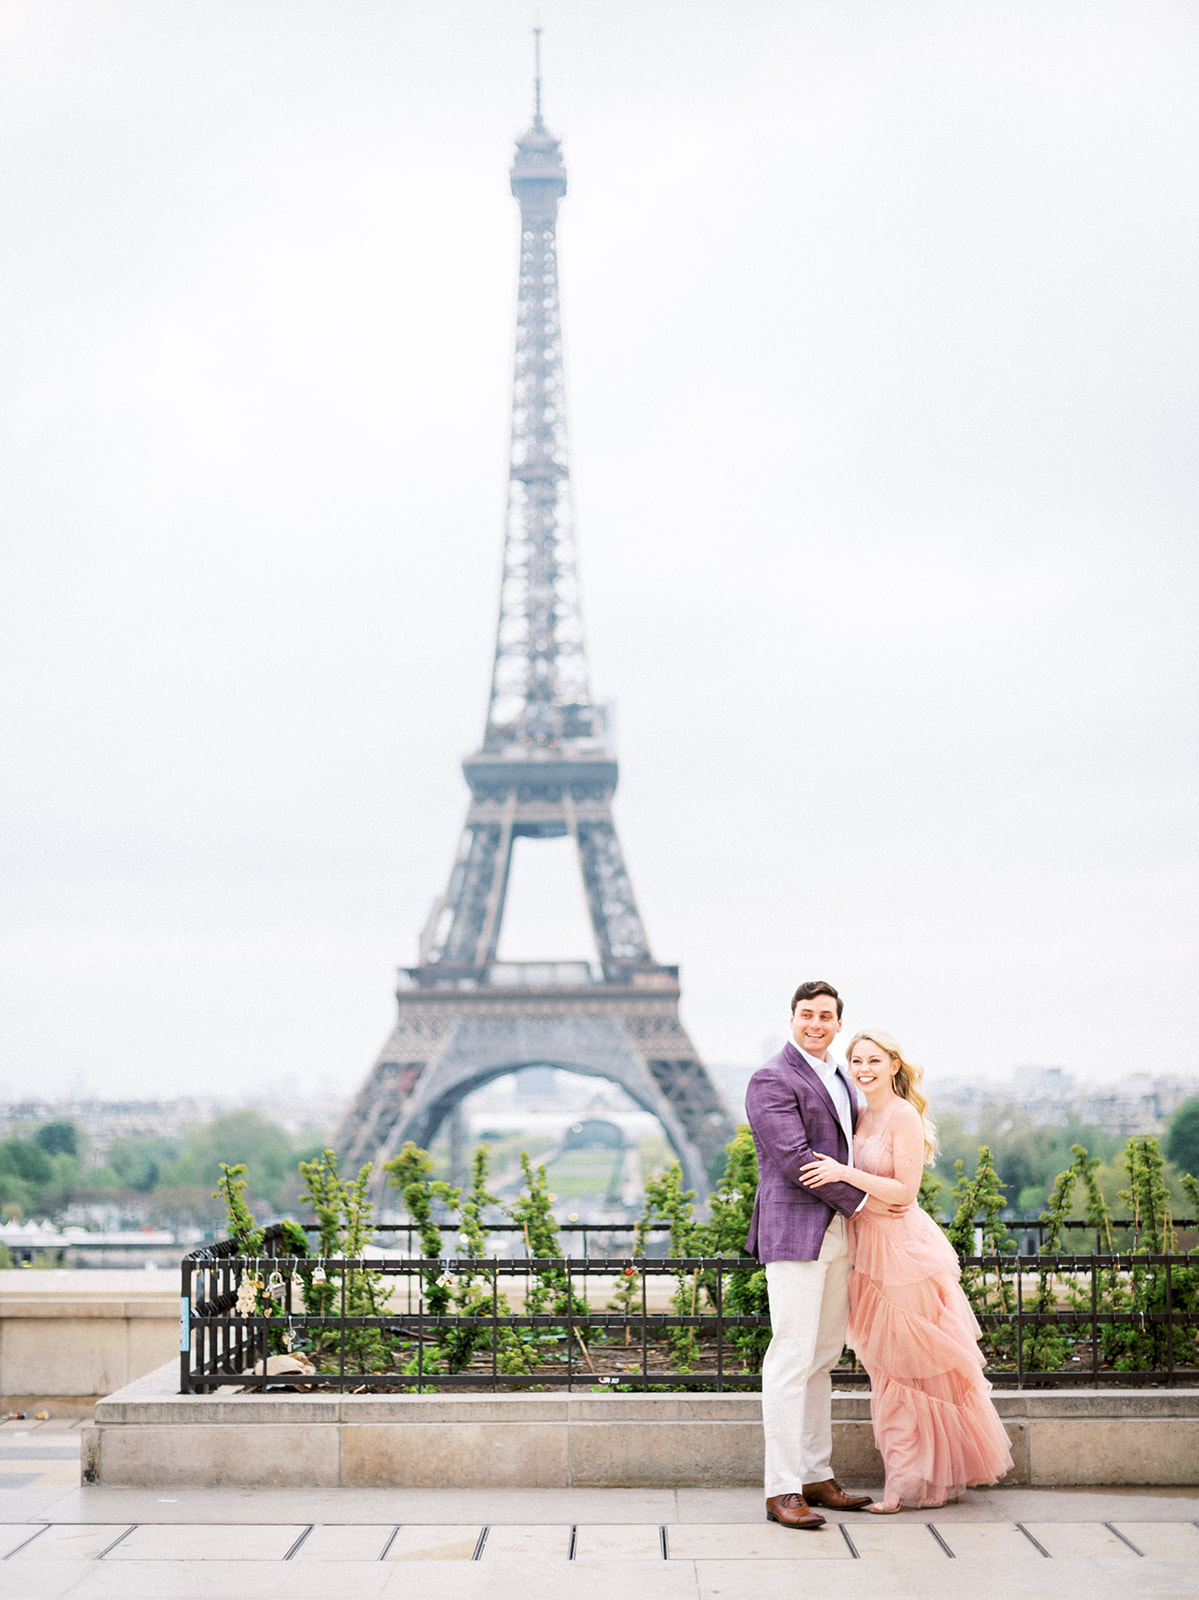 Couple happy with Eiffel Tower in the background.